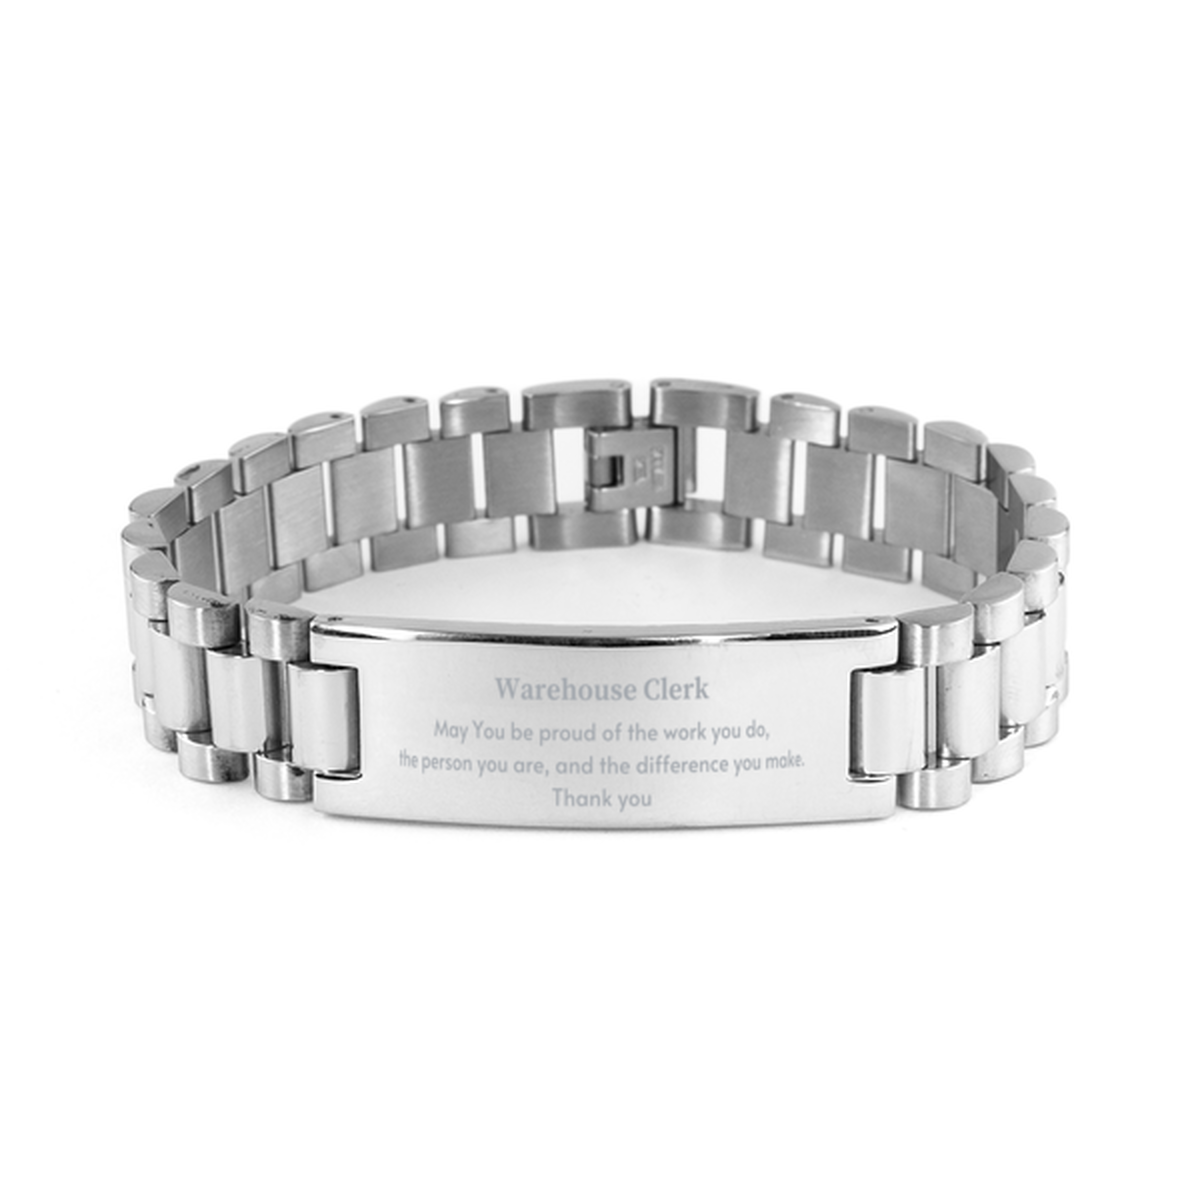 Heartwarming Ladder Stainless Steel Bracelet Retirement Coworkers Gifts for Warehouse Clerk, Warehouse Clerk May You be proud of the work you do, the person you are Gifts for Boss Men Women Friends